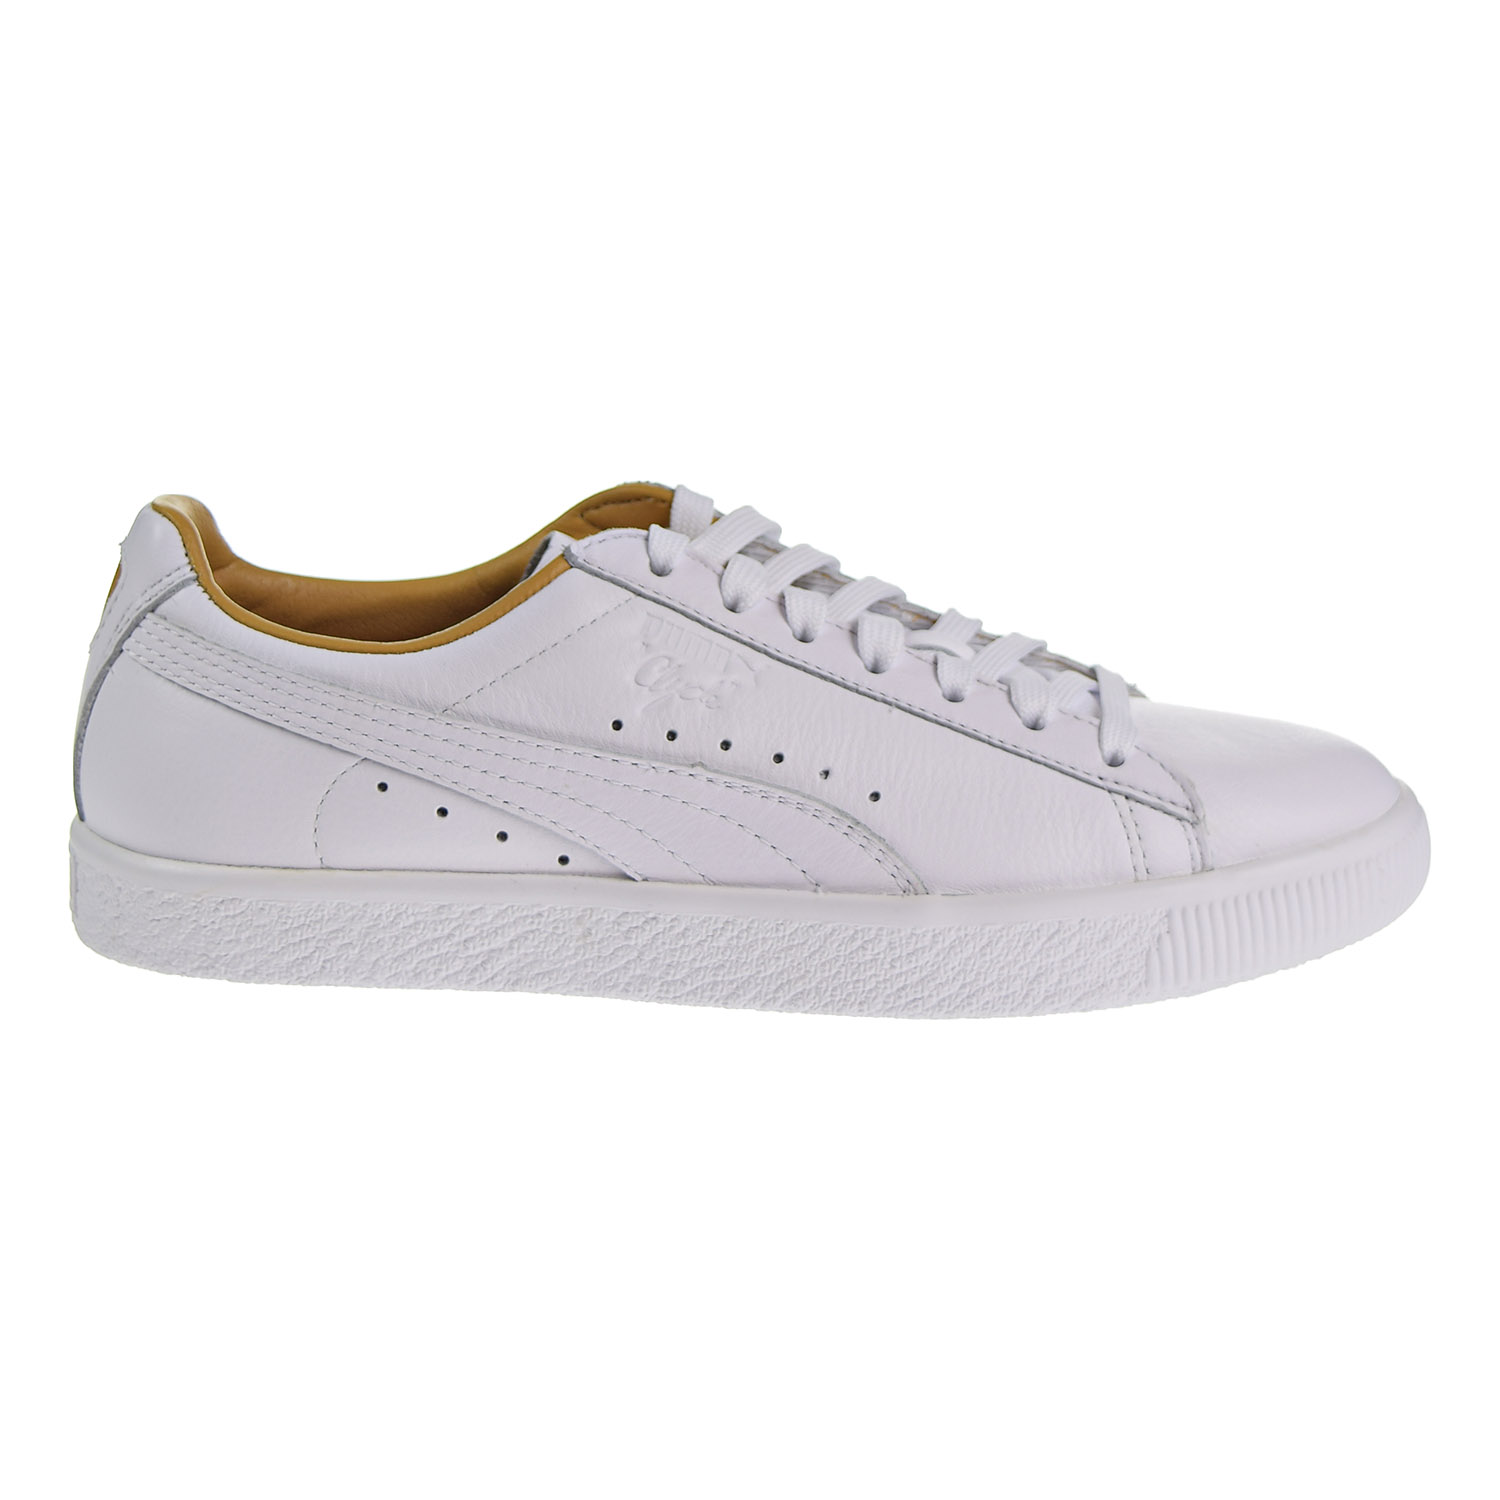 Puma Clyde Core Leather Women's Shoes 